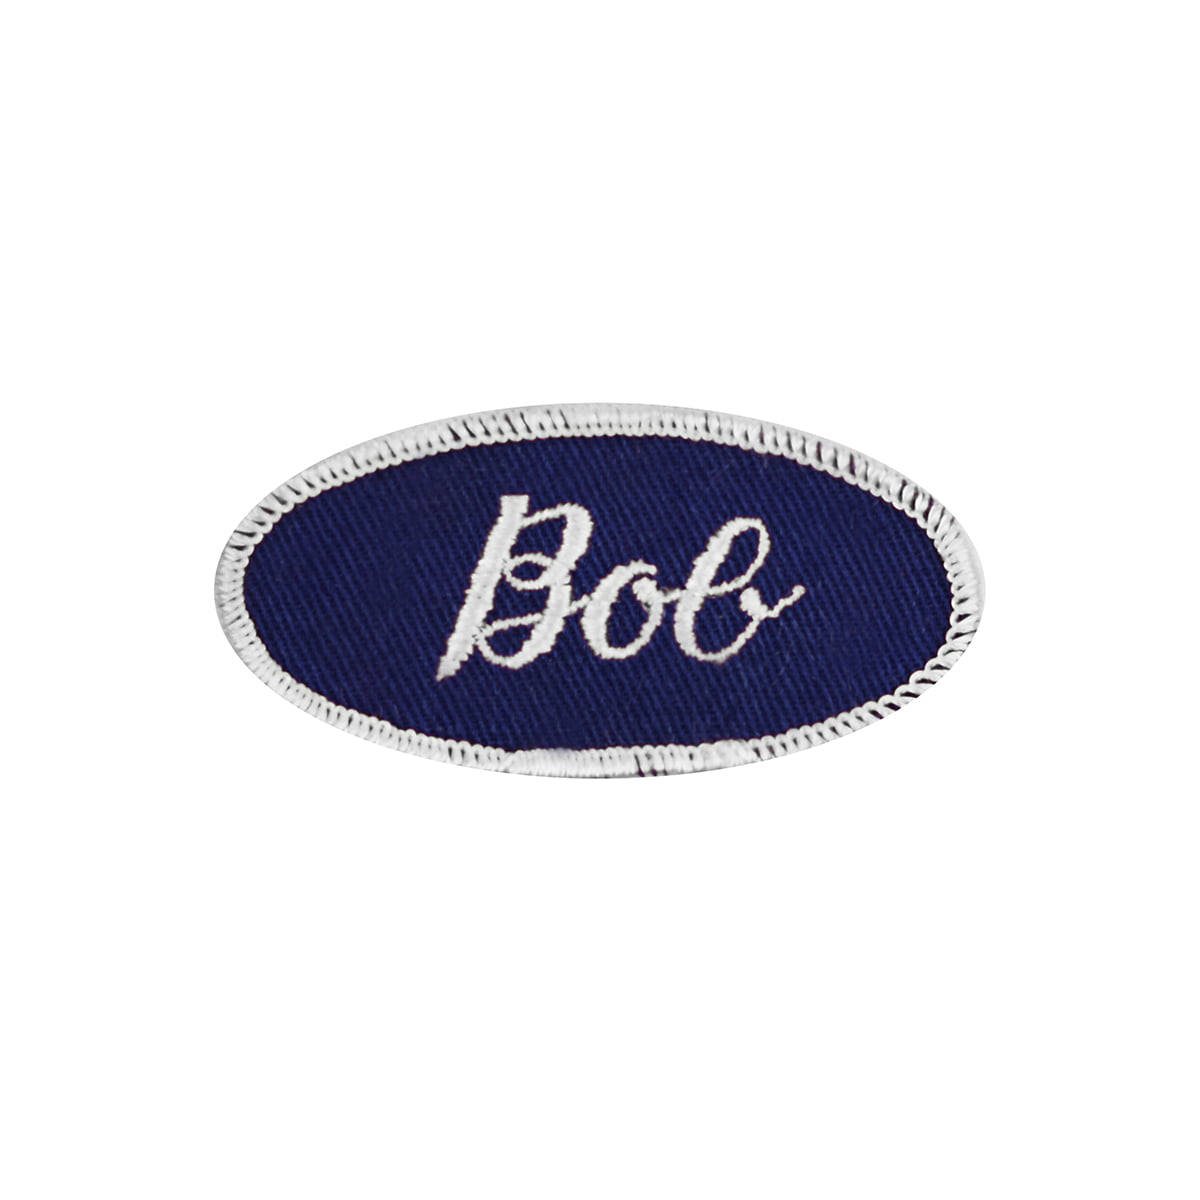 Ford Motors Emblem Patch~Car Truck Auto~3 1/2" x 1 1/2"~Embroidered~Iron Sew On 